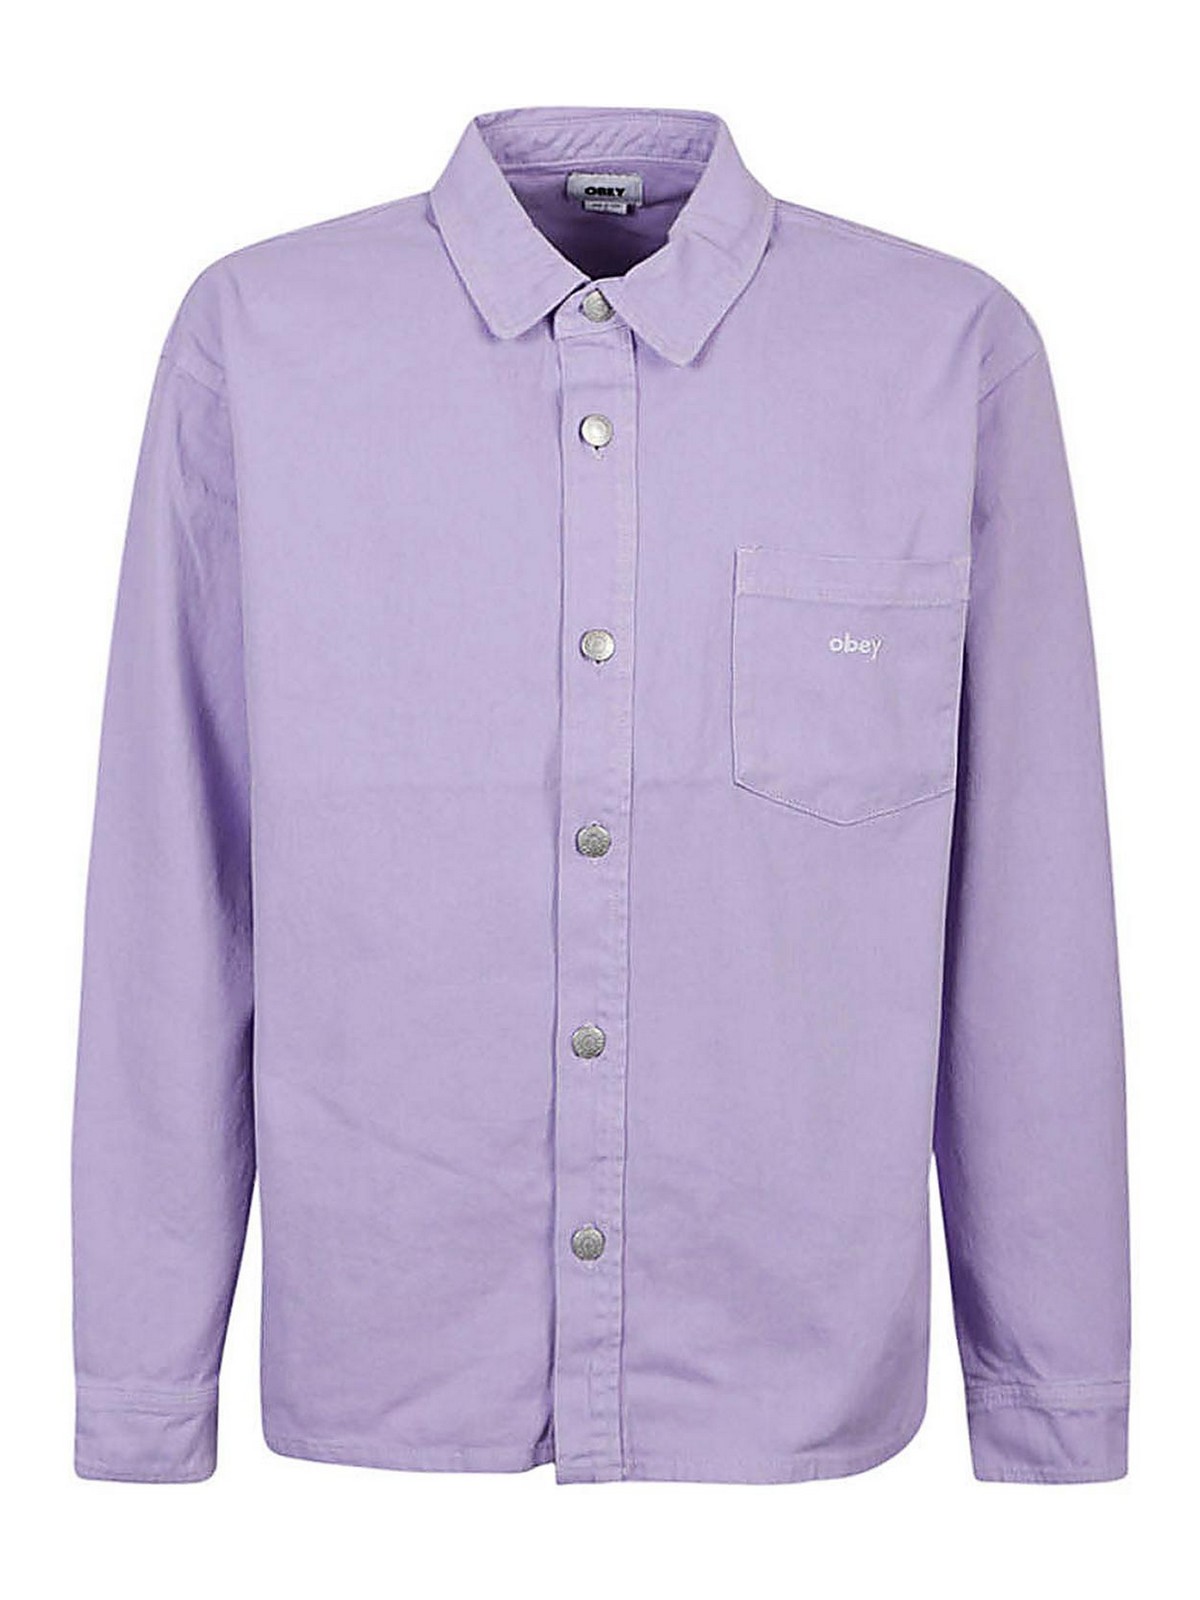 Obey Magnolia Cotton Shirt In Violet